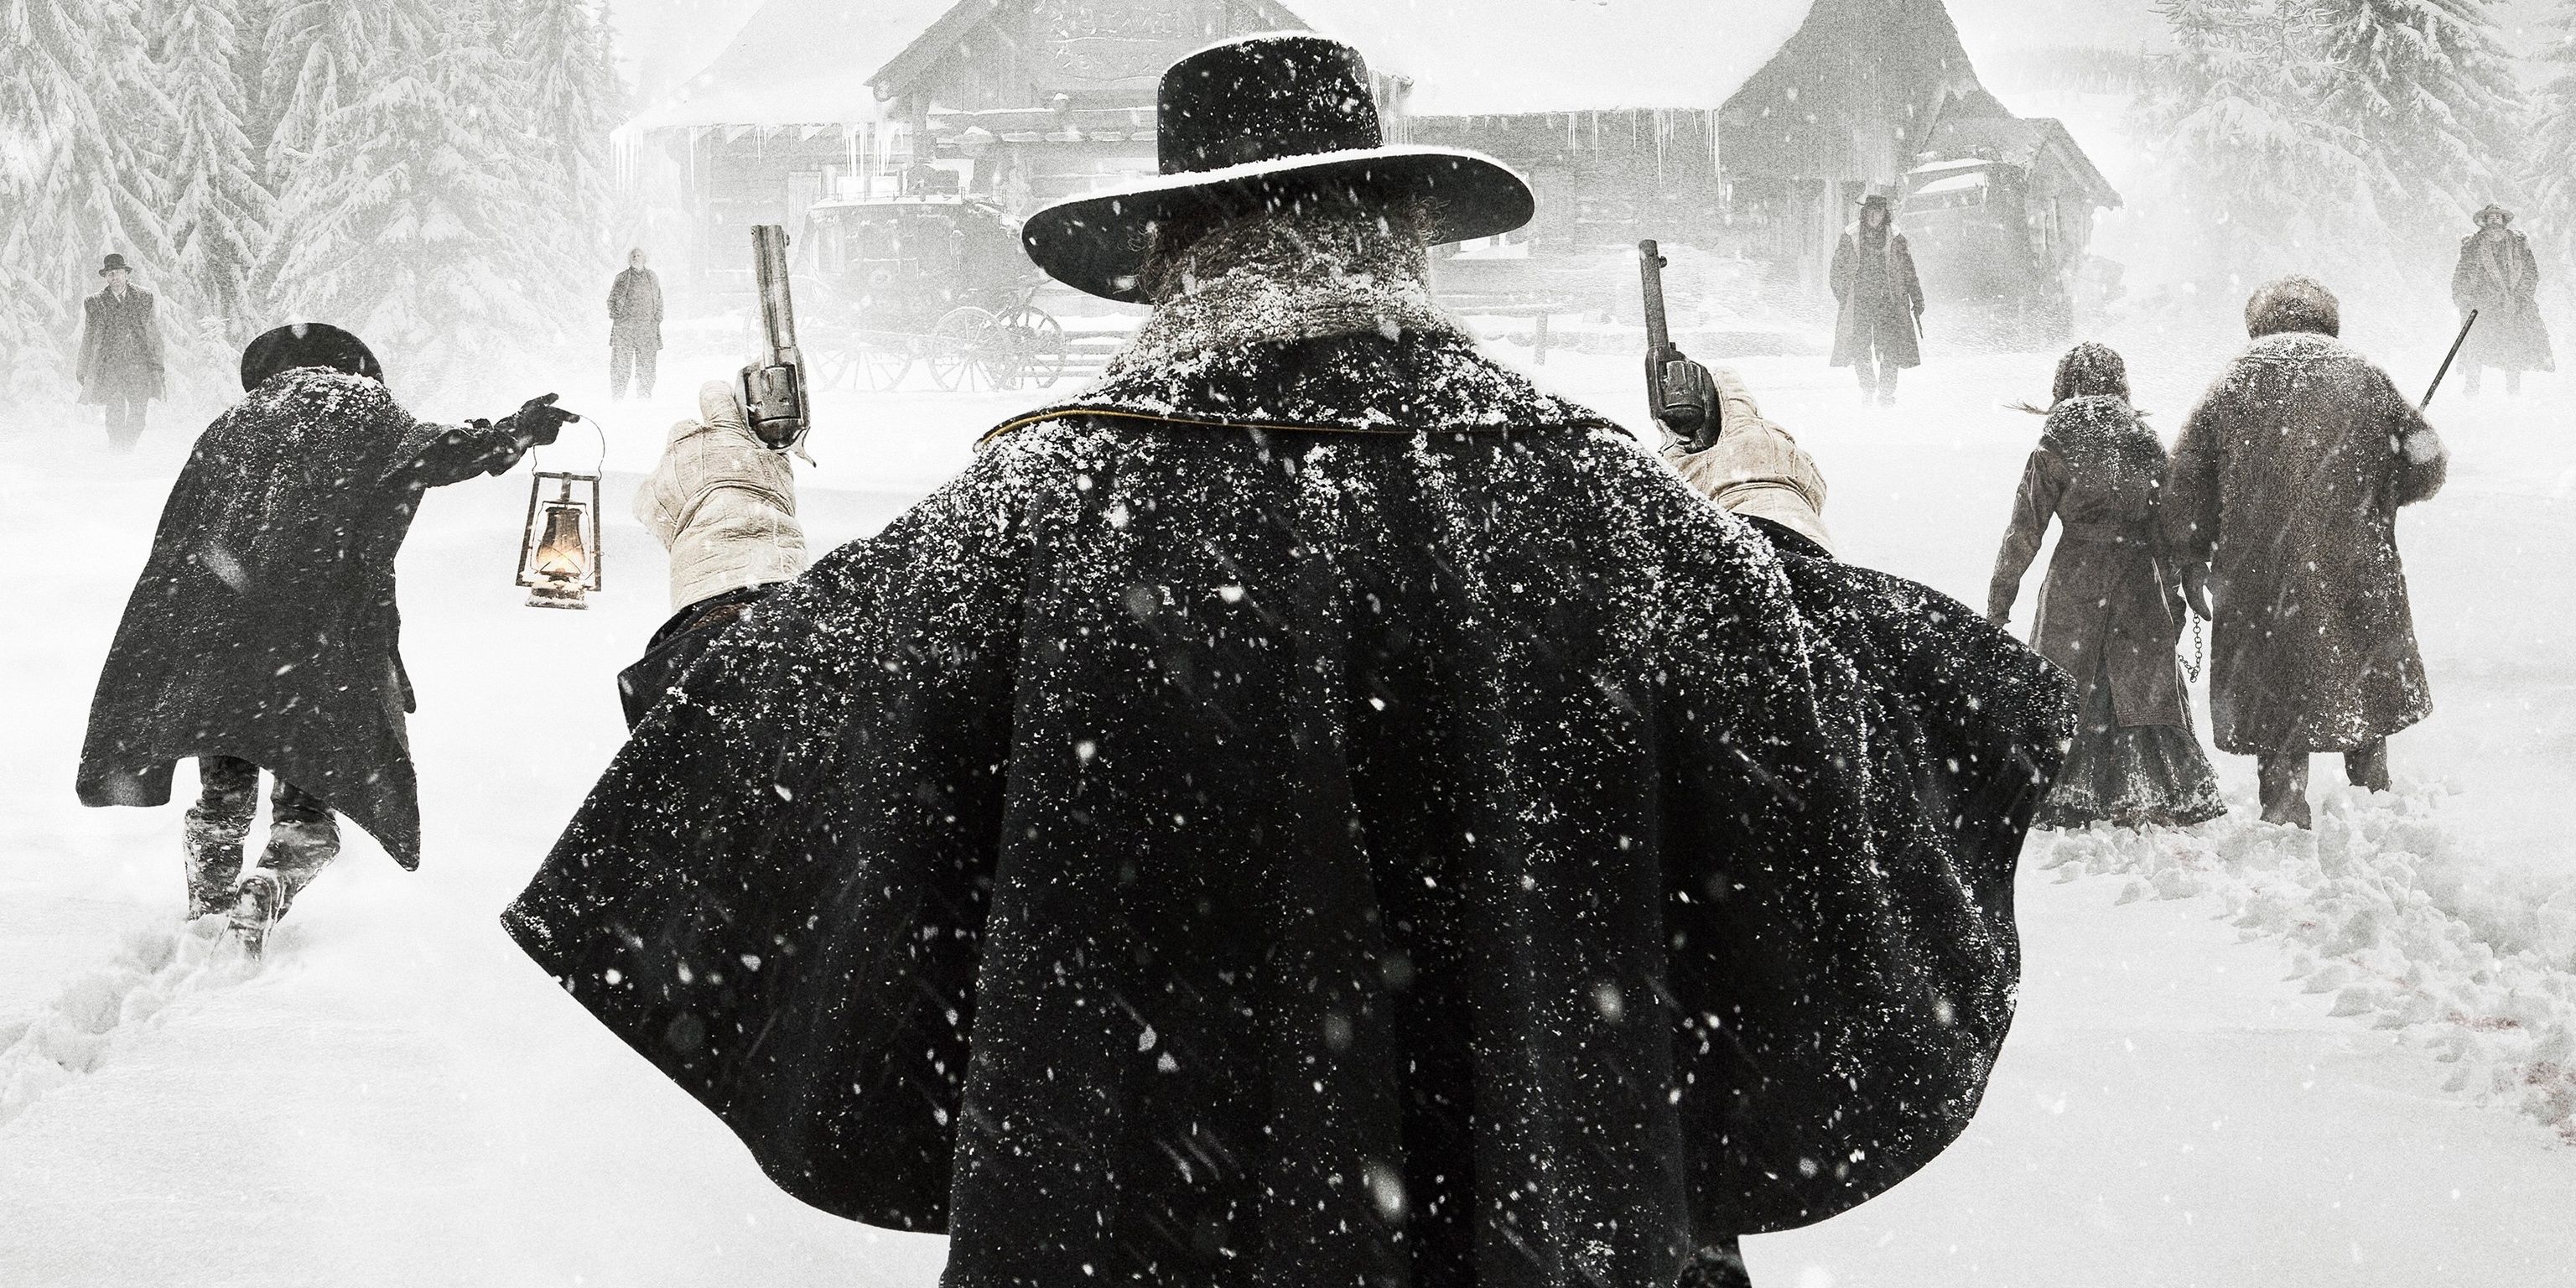 Samuel L. Jackson in The Hateful Eight standing in snow holding up two revolvers